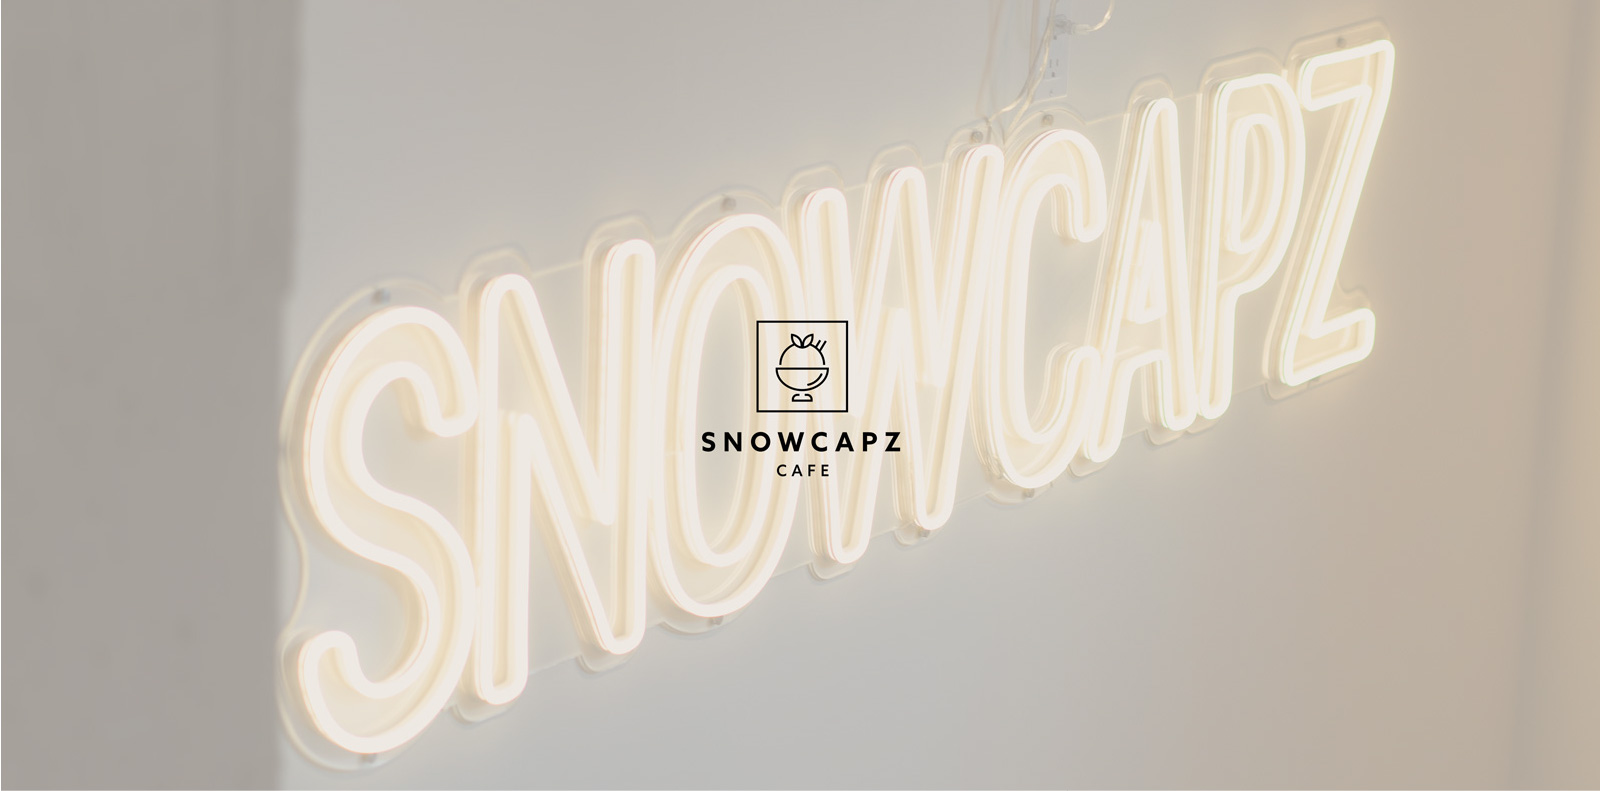 Korean Croffle, Shaved Ice Desserts, Snowcapz Cafe YYC's loaction in Calgary